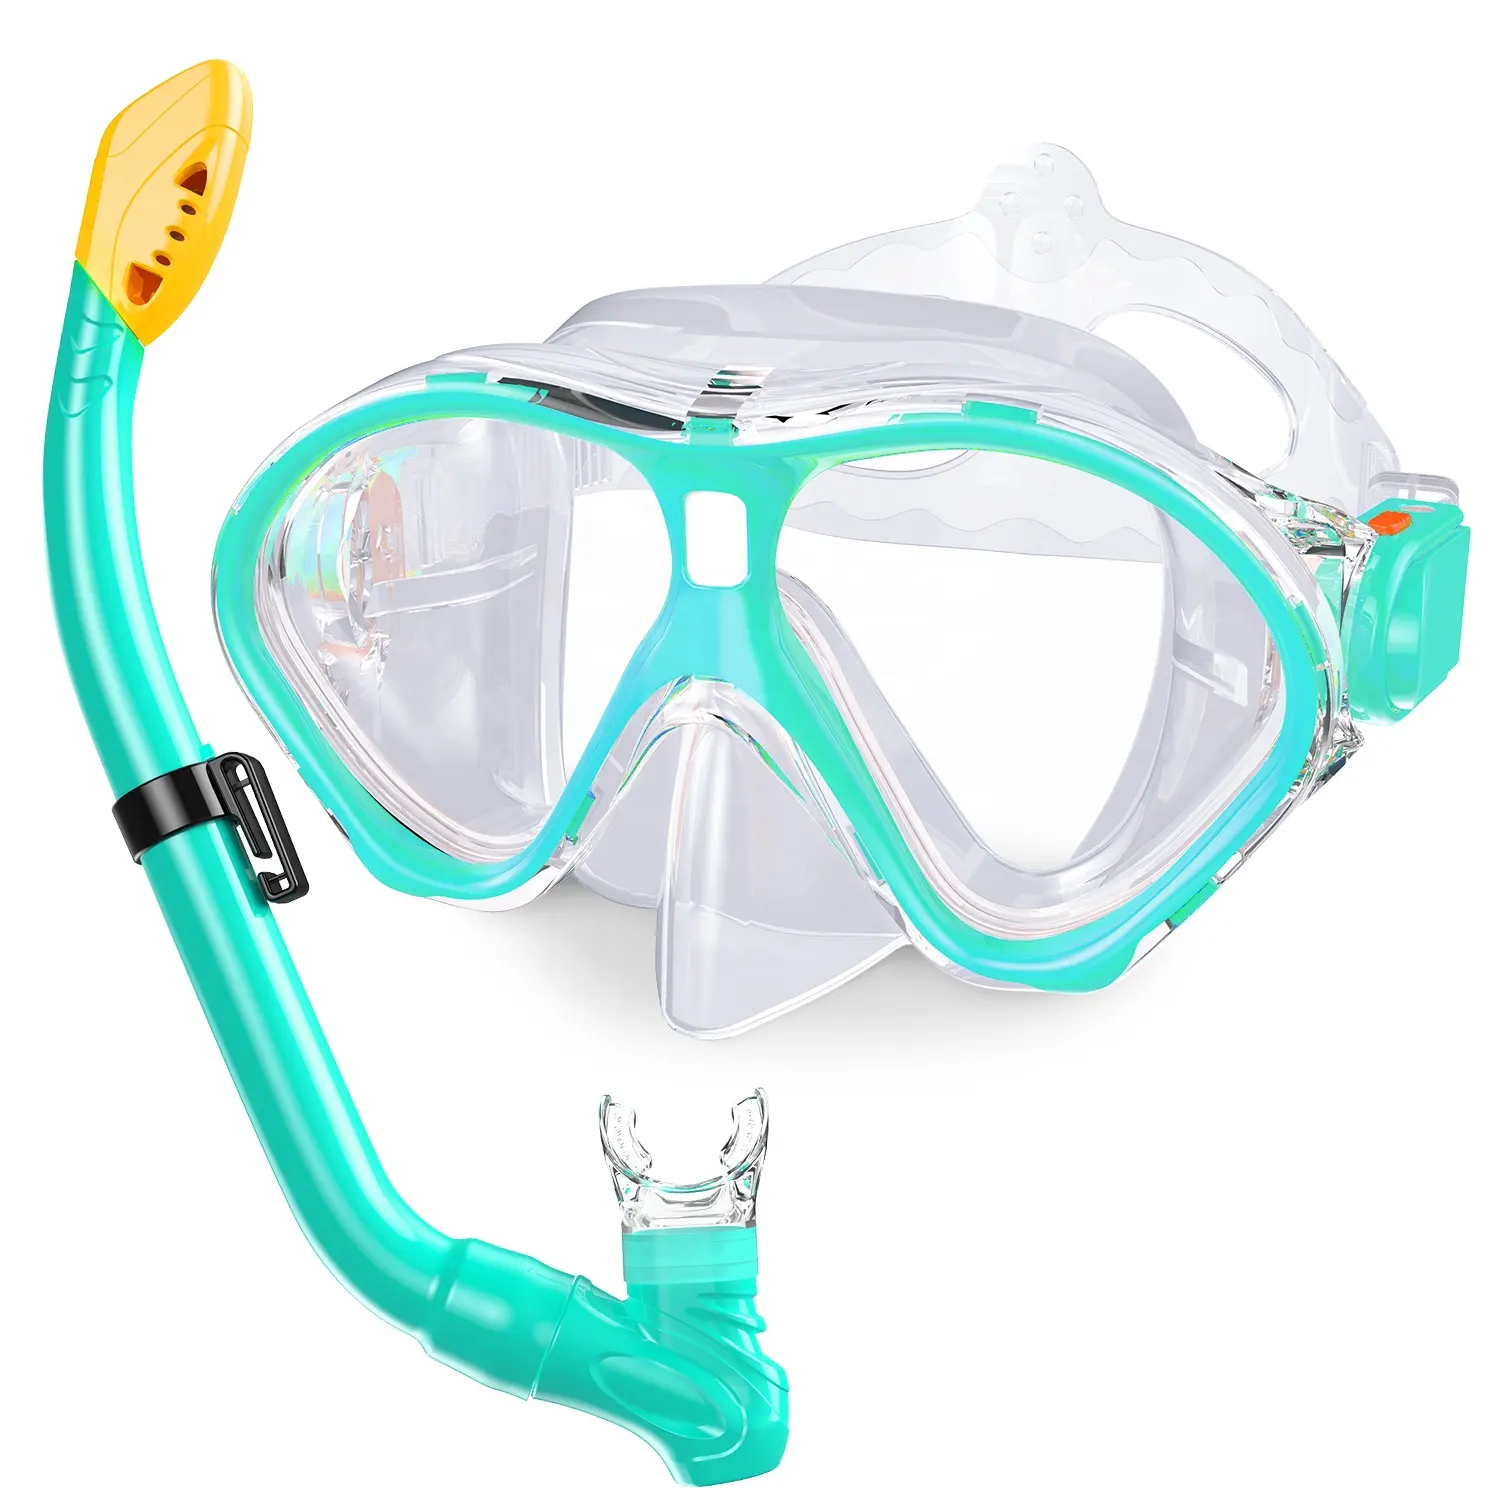 Youth Child Diving Mask with Big Eyes for Boys Girls Anti-Fog Snorkeling Mask and Tube Kids Snorkel Set for Age 4-14